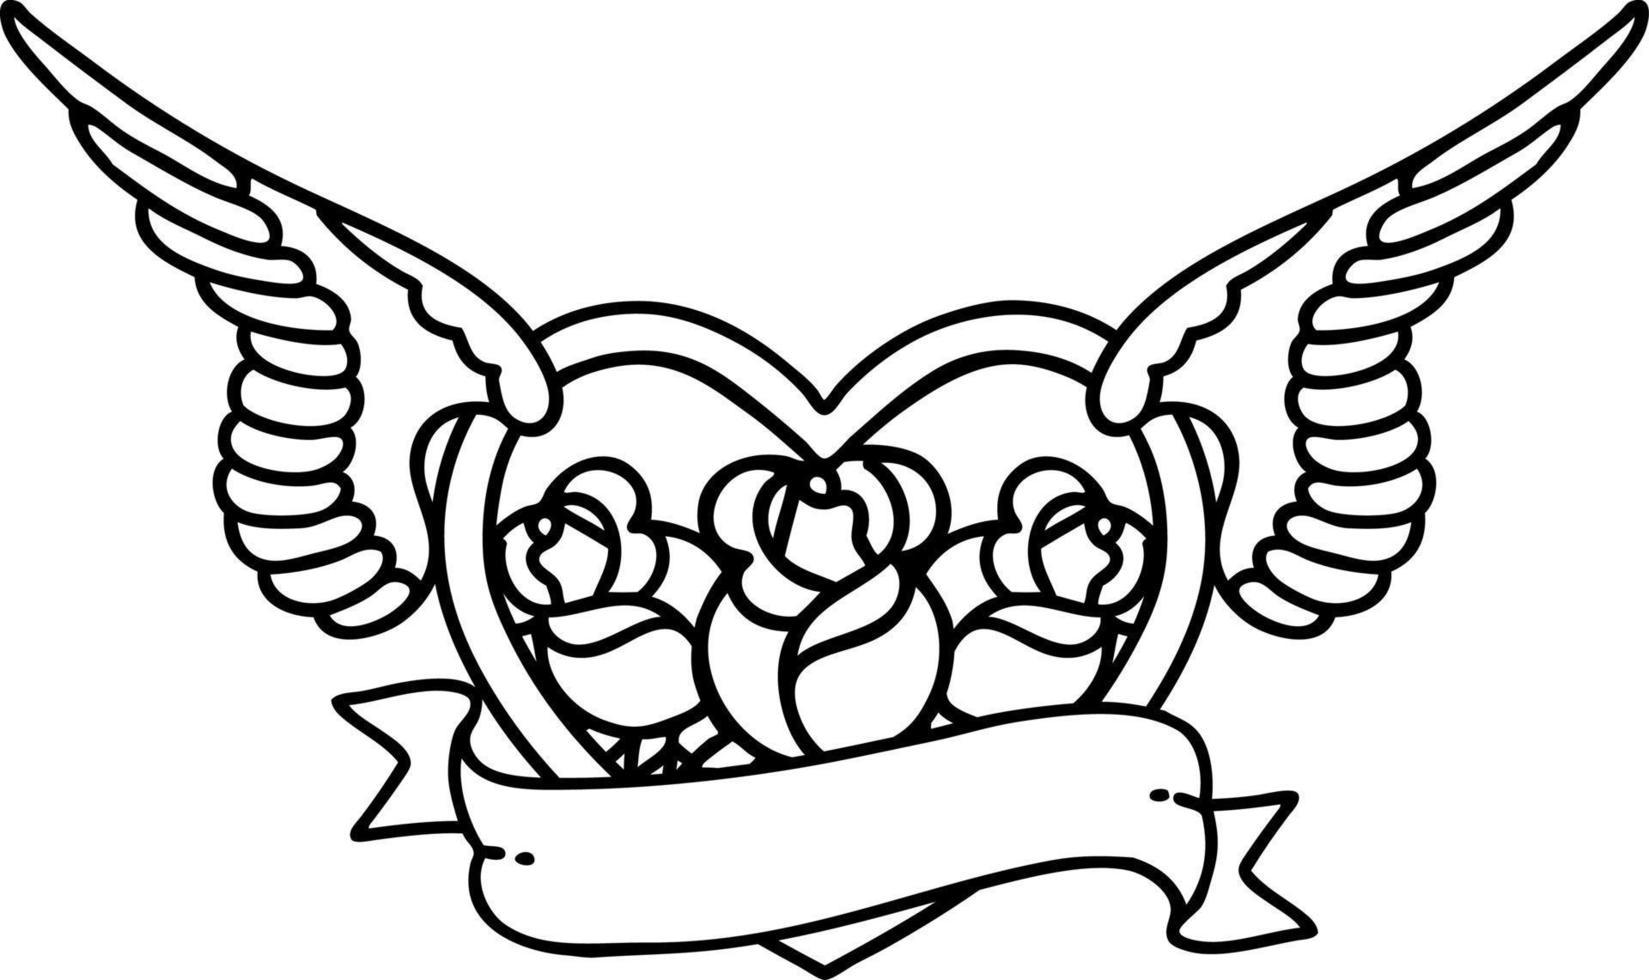 tattoo in black line style of a flying heart with flowers and banner vector